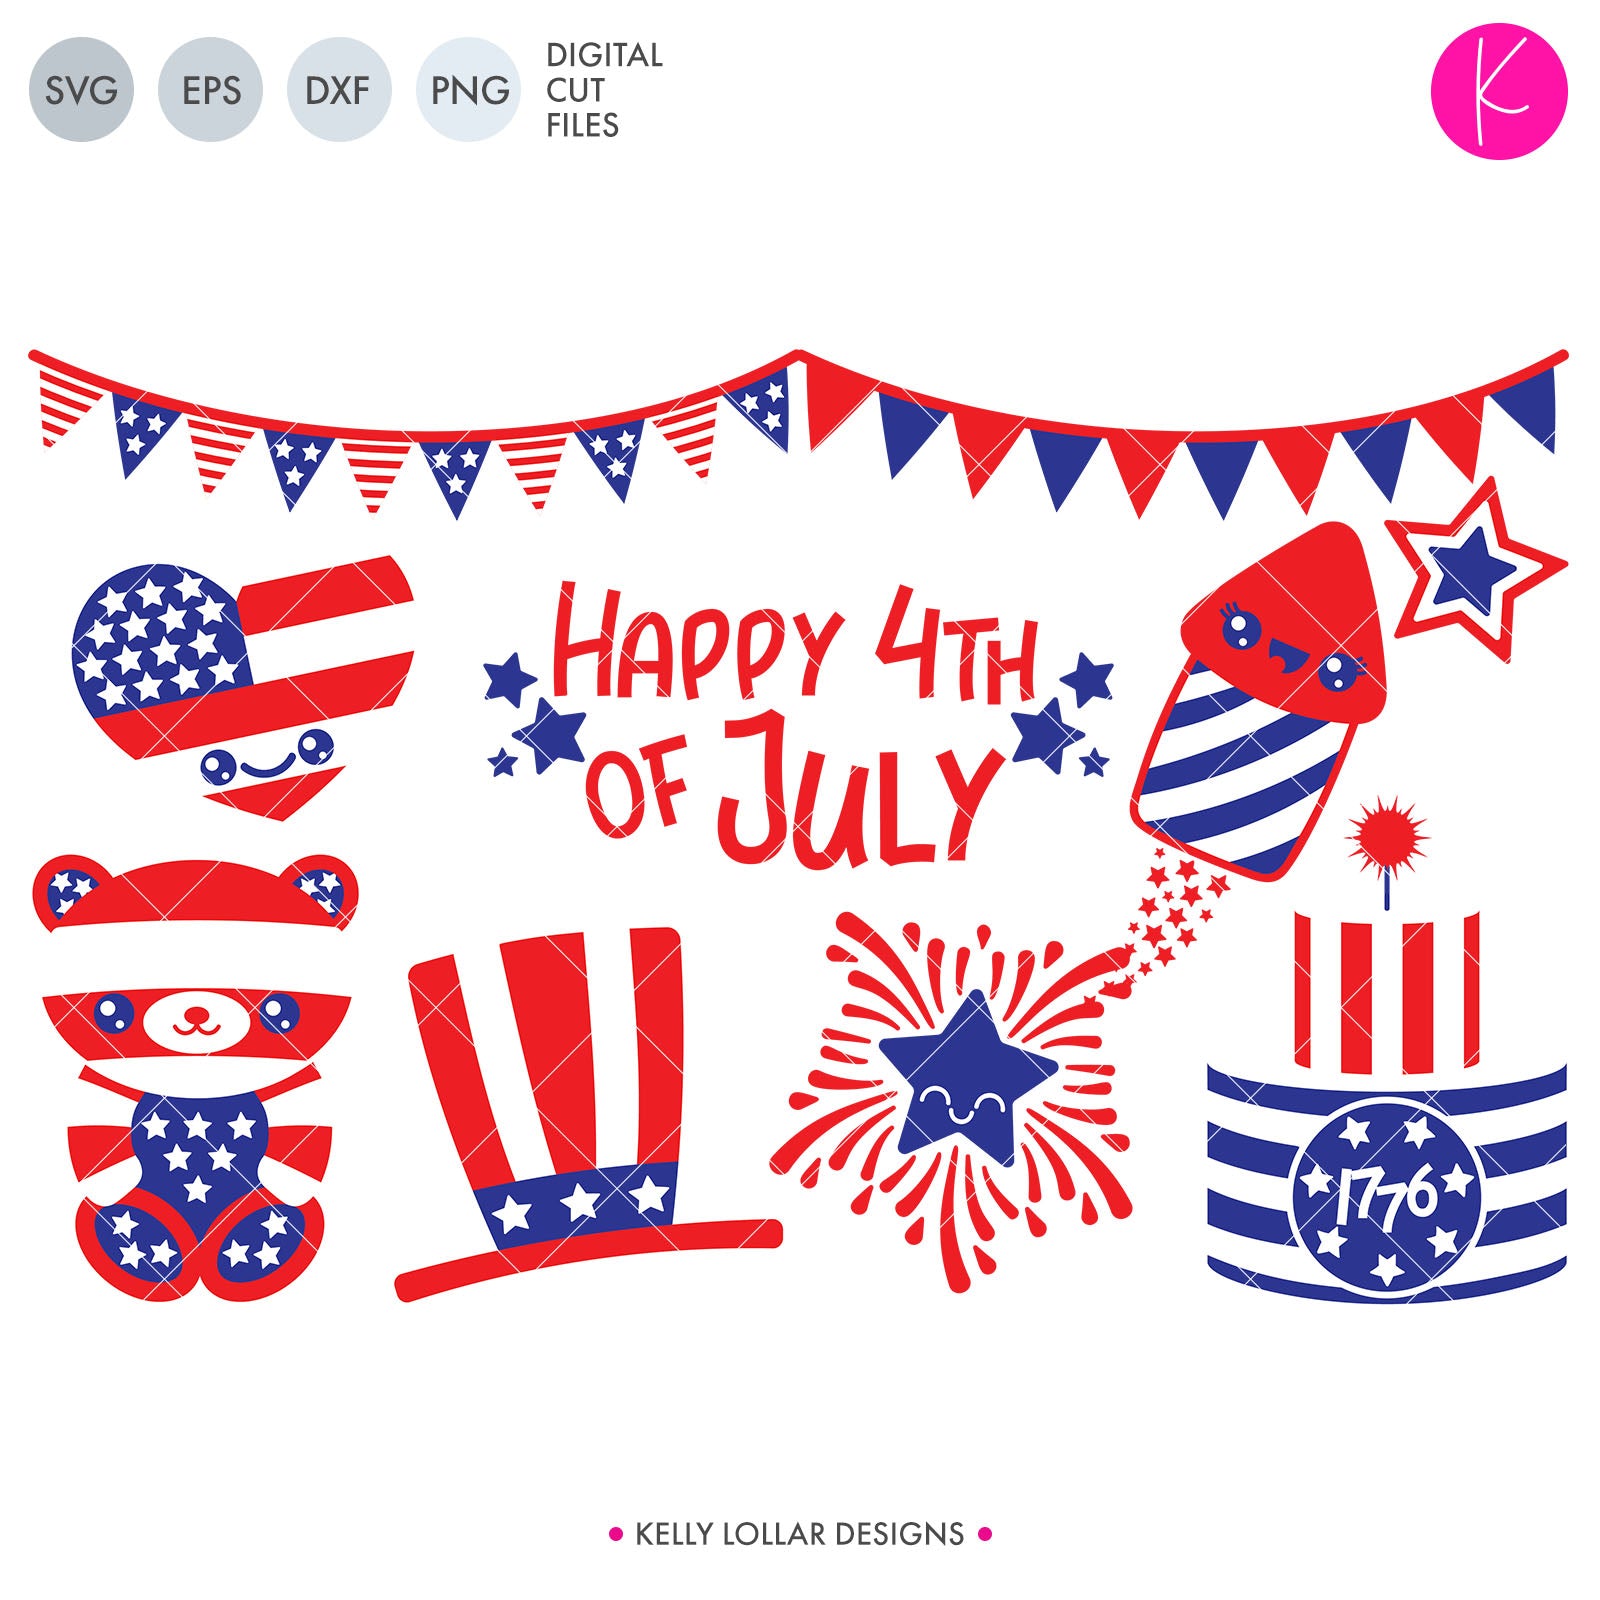 Download 4th of July Character SVG Pack | Kelly Lollar Designs